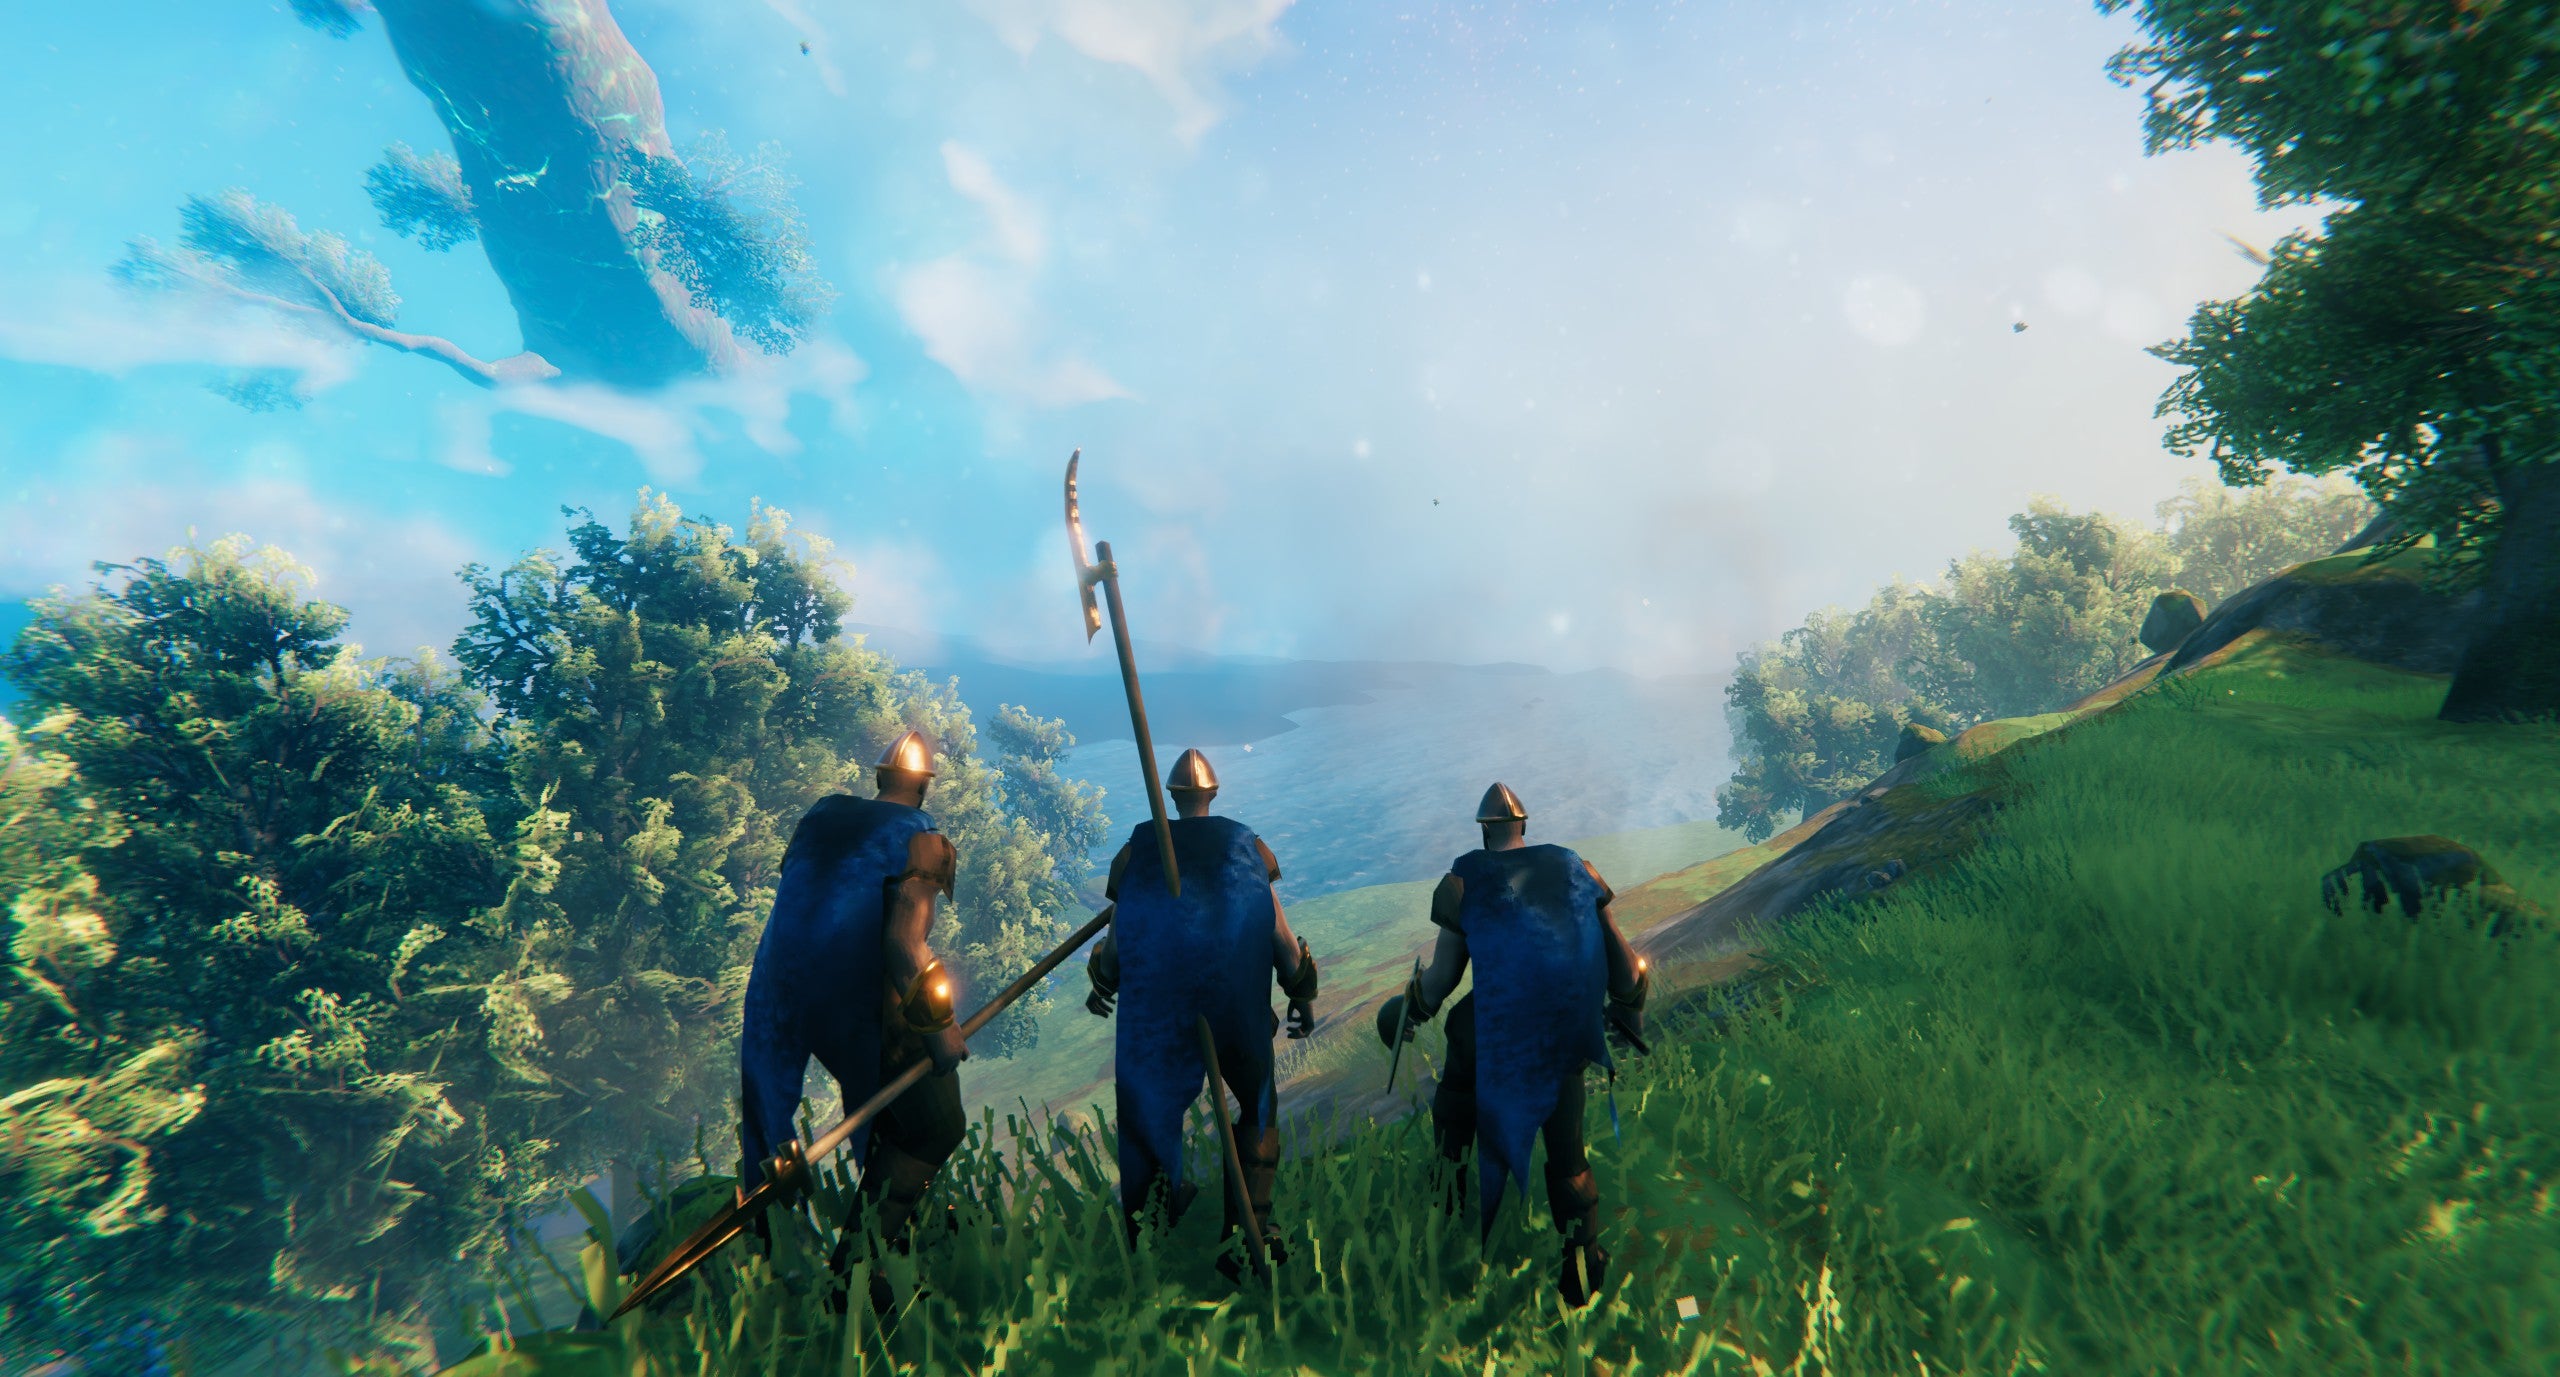 state of the game valheim - exploring as a trio looking out over grassy hills under a blue sky